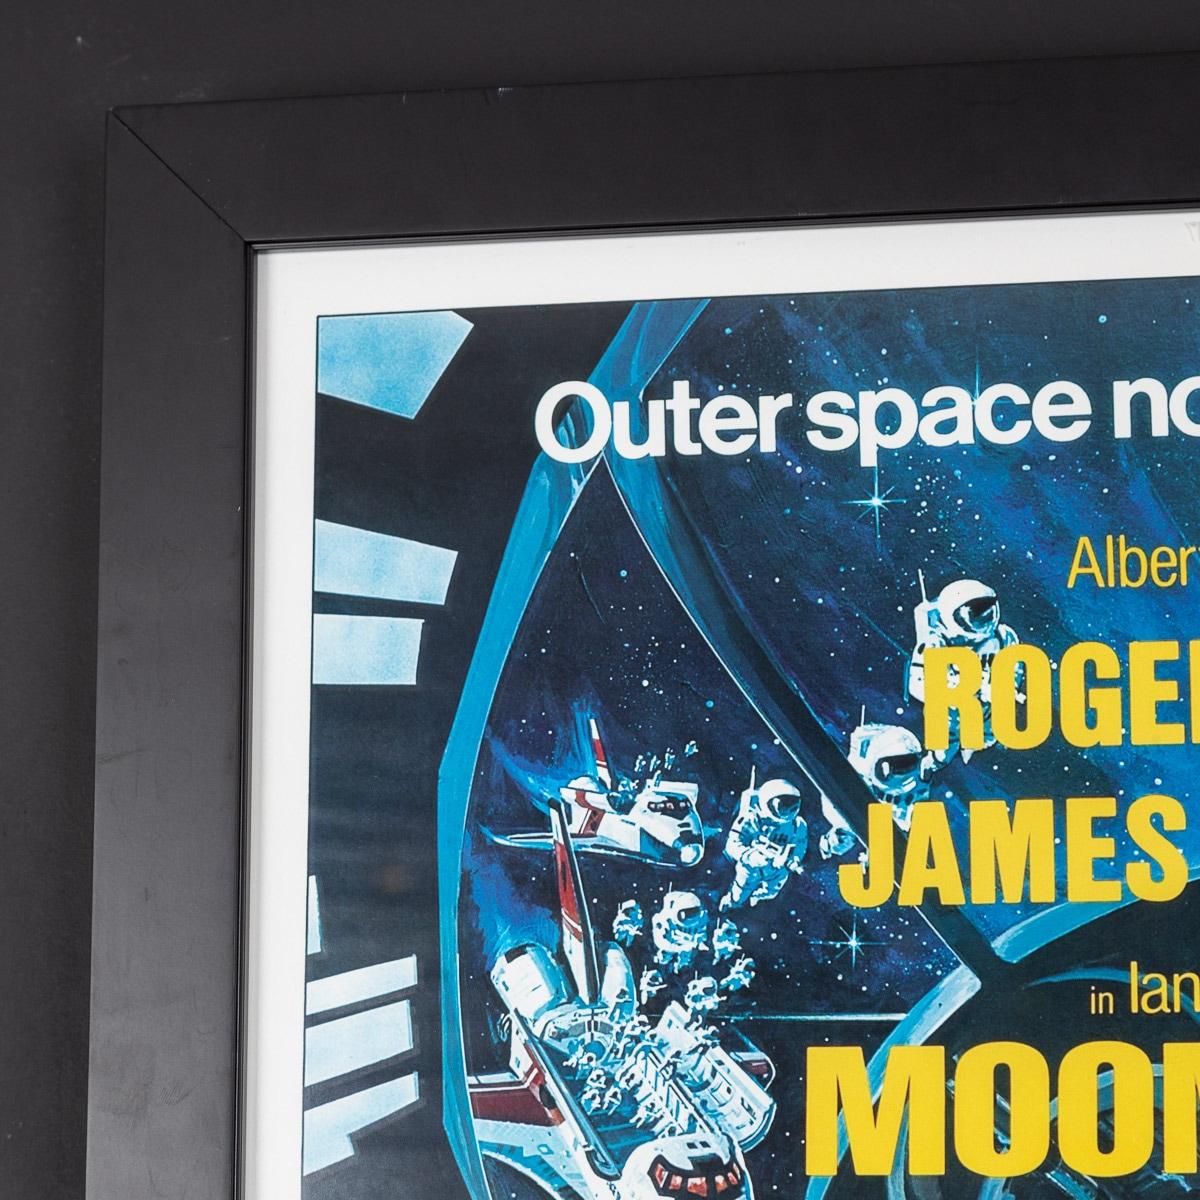 A very rare and original British (UK) release poster from the blockbuster Moonraker (1979), signed by Roger Moore. This was the eleventh in the James Bond series produced by Eon Productions, and the fourth to star Roger Moore as James